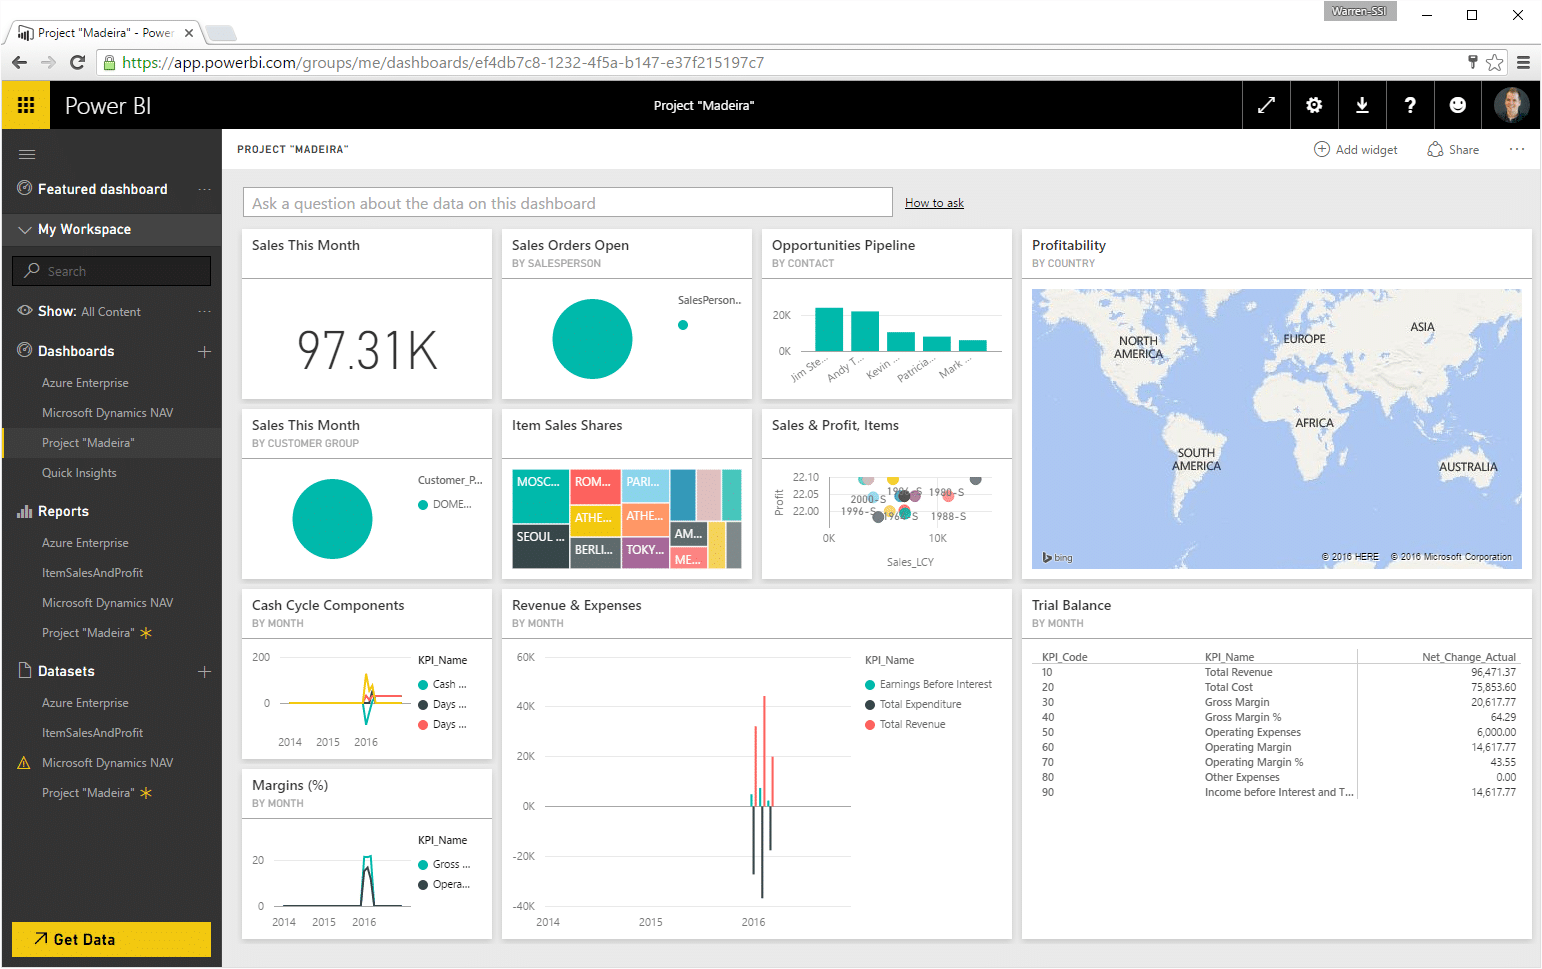 How to integrate power bi with project madeira